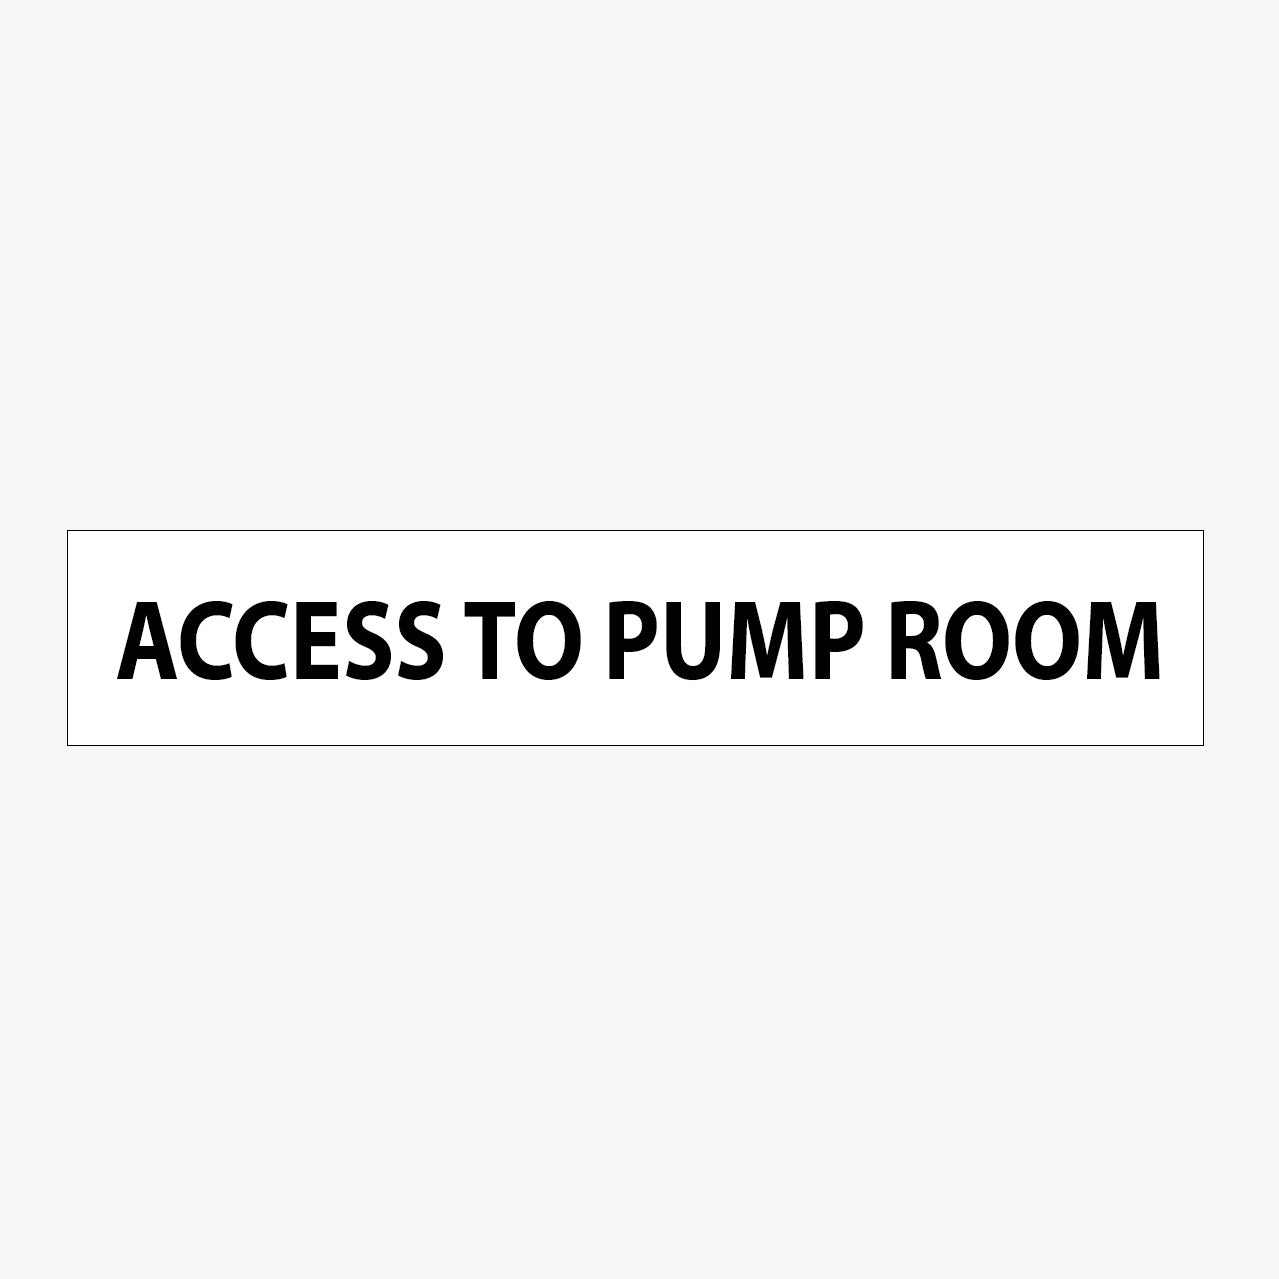 STATUTORY SIGN - ACCESS TO PUMP ROOM SIGN